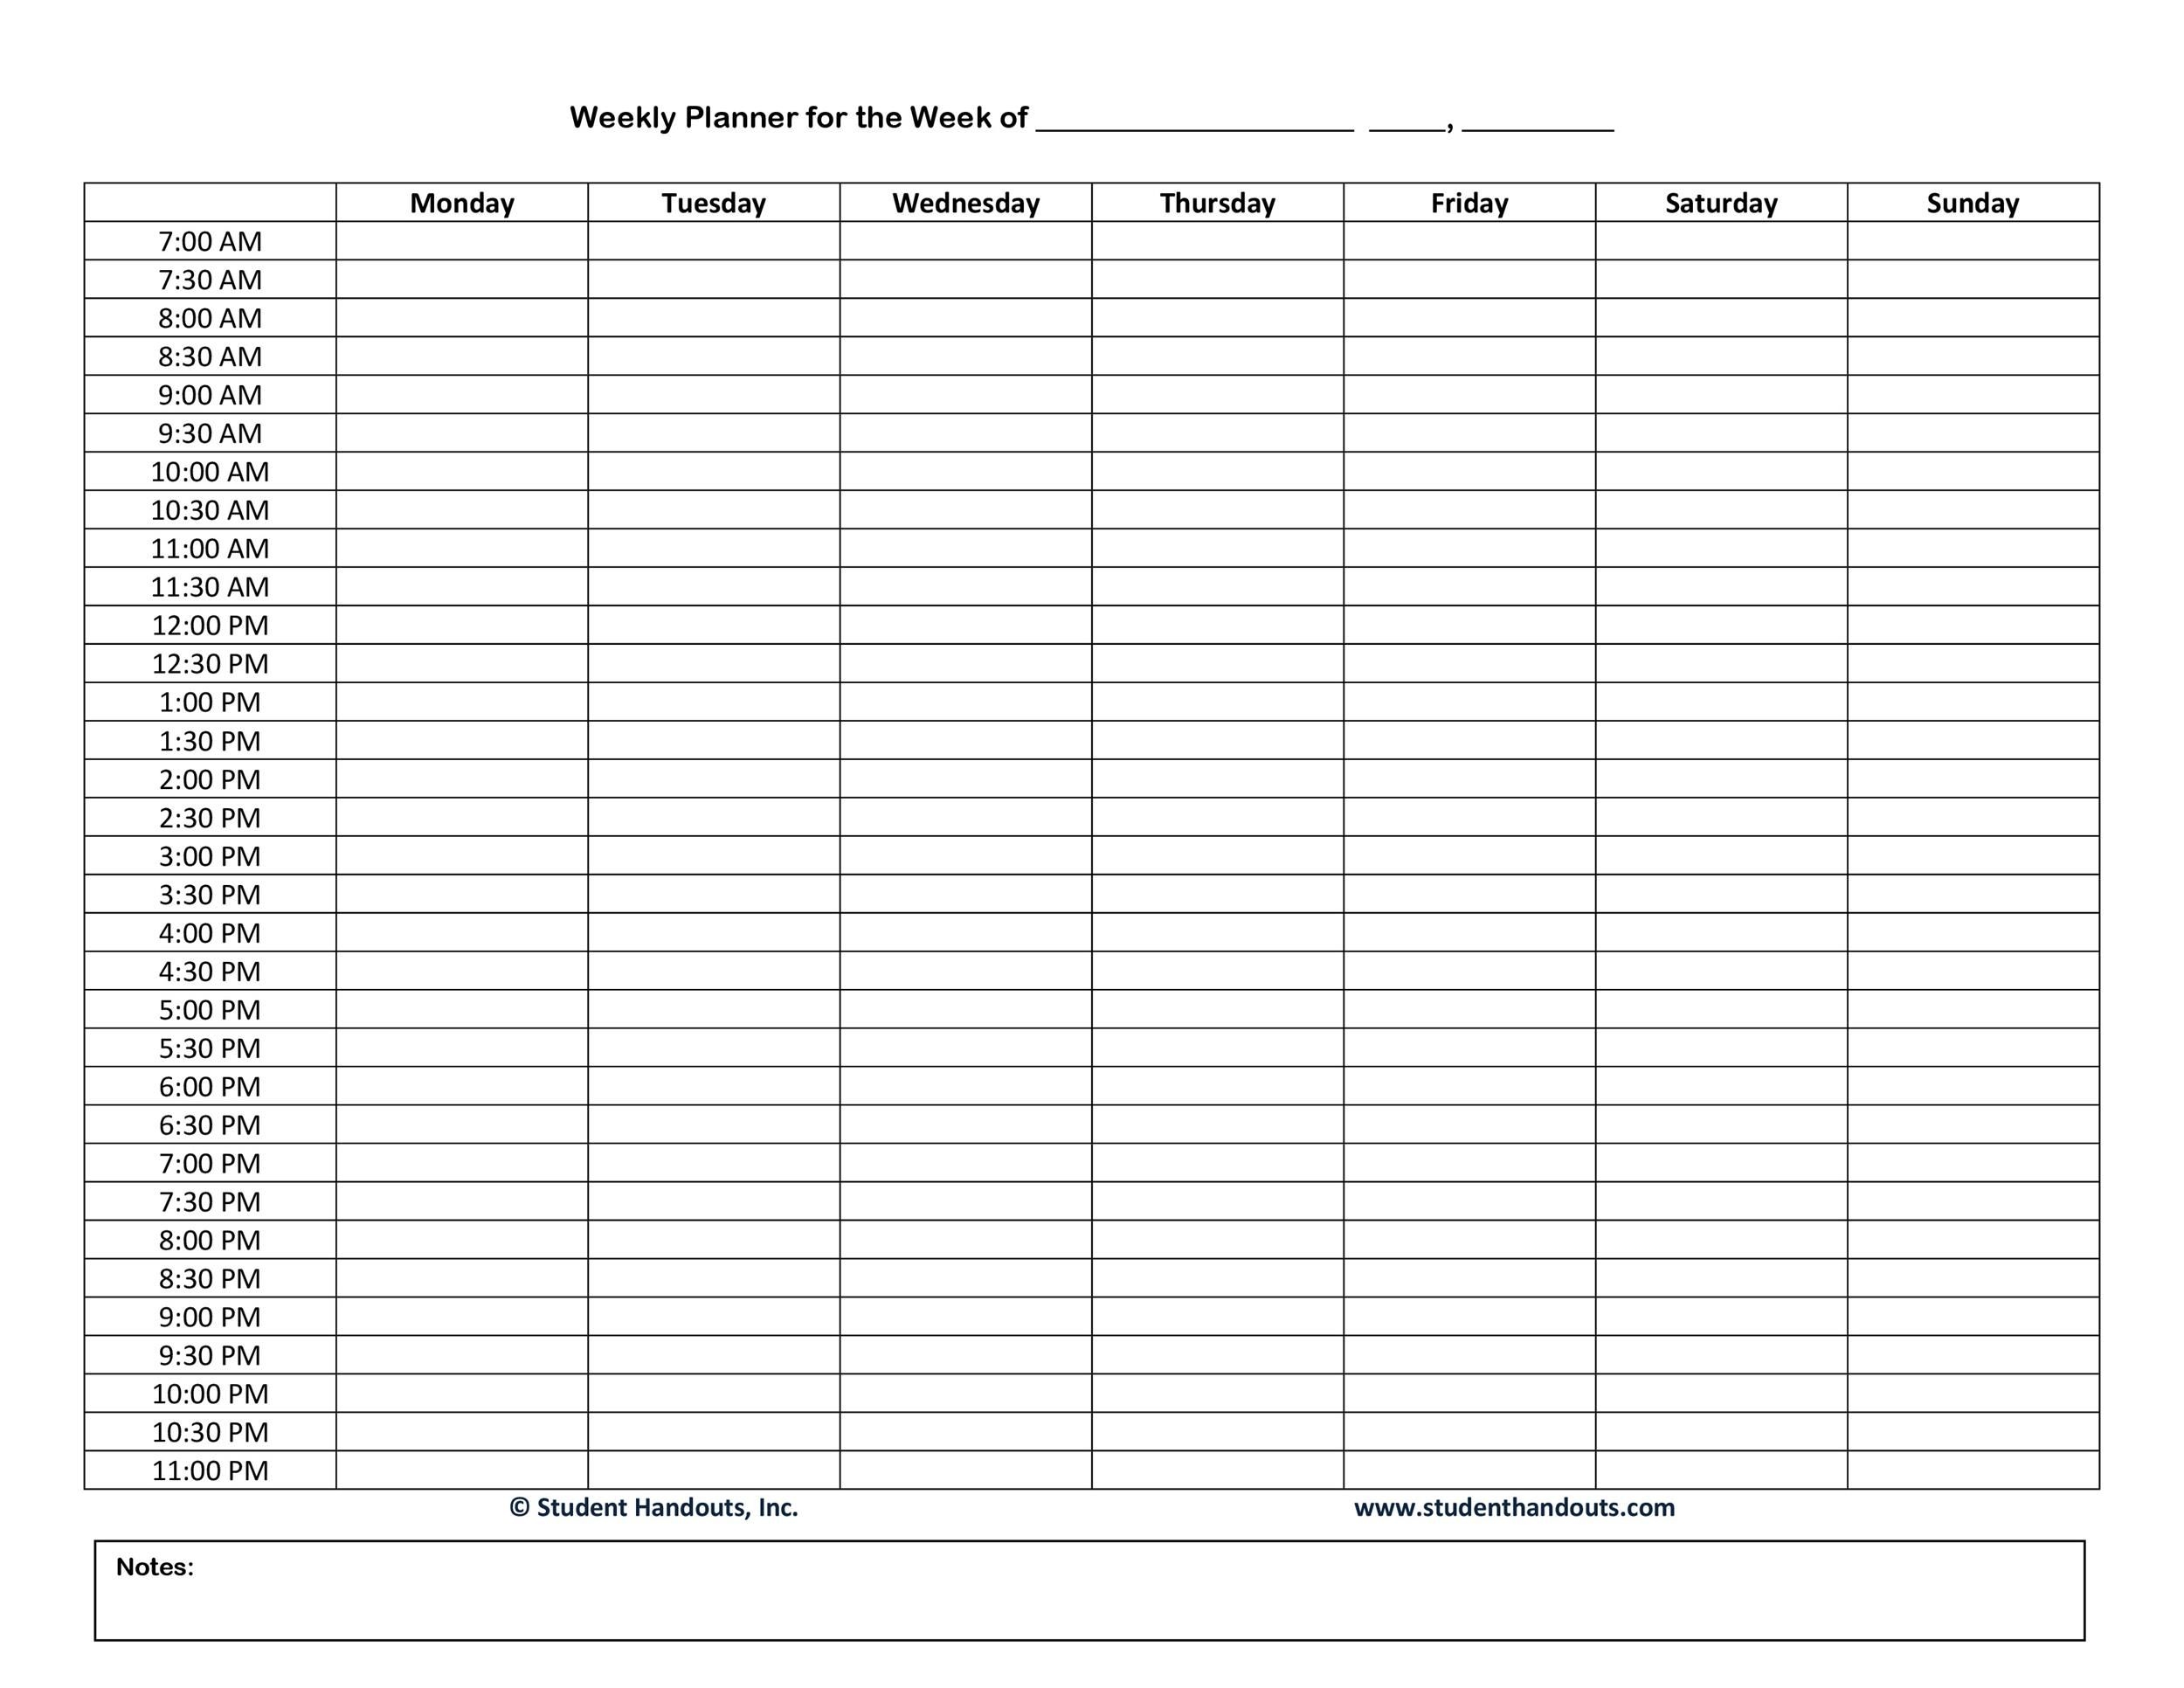 47 printable daily planner templates (free in word/excel/pdf)